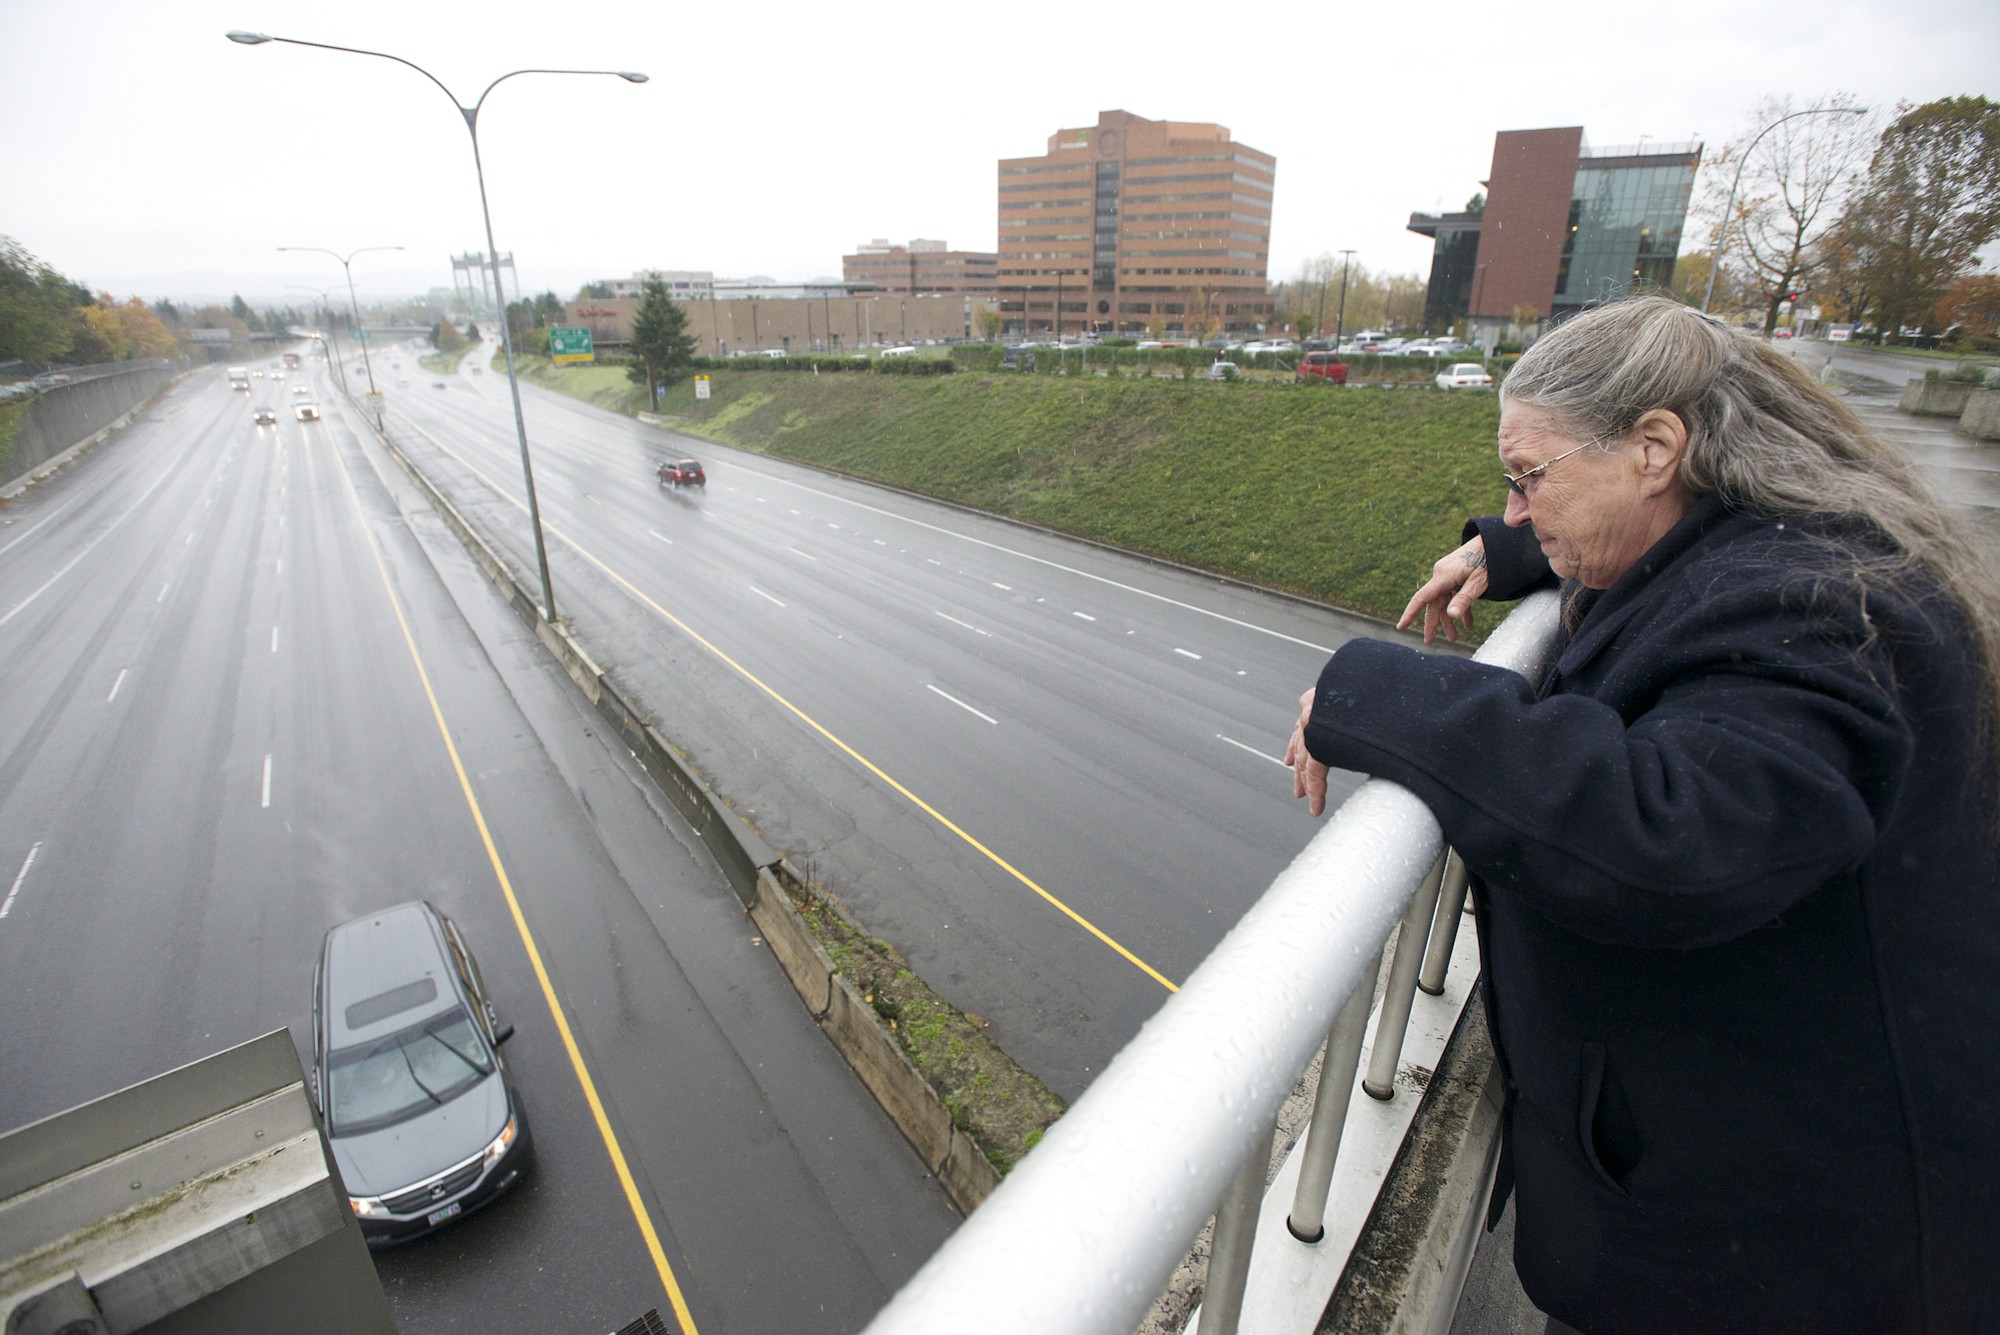 Carol Miller, 68, stopped to help Wednesday, when she saw a woman trying to jump off of the East Evergreen Boulevard Interstate 5 overpass.